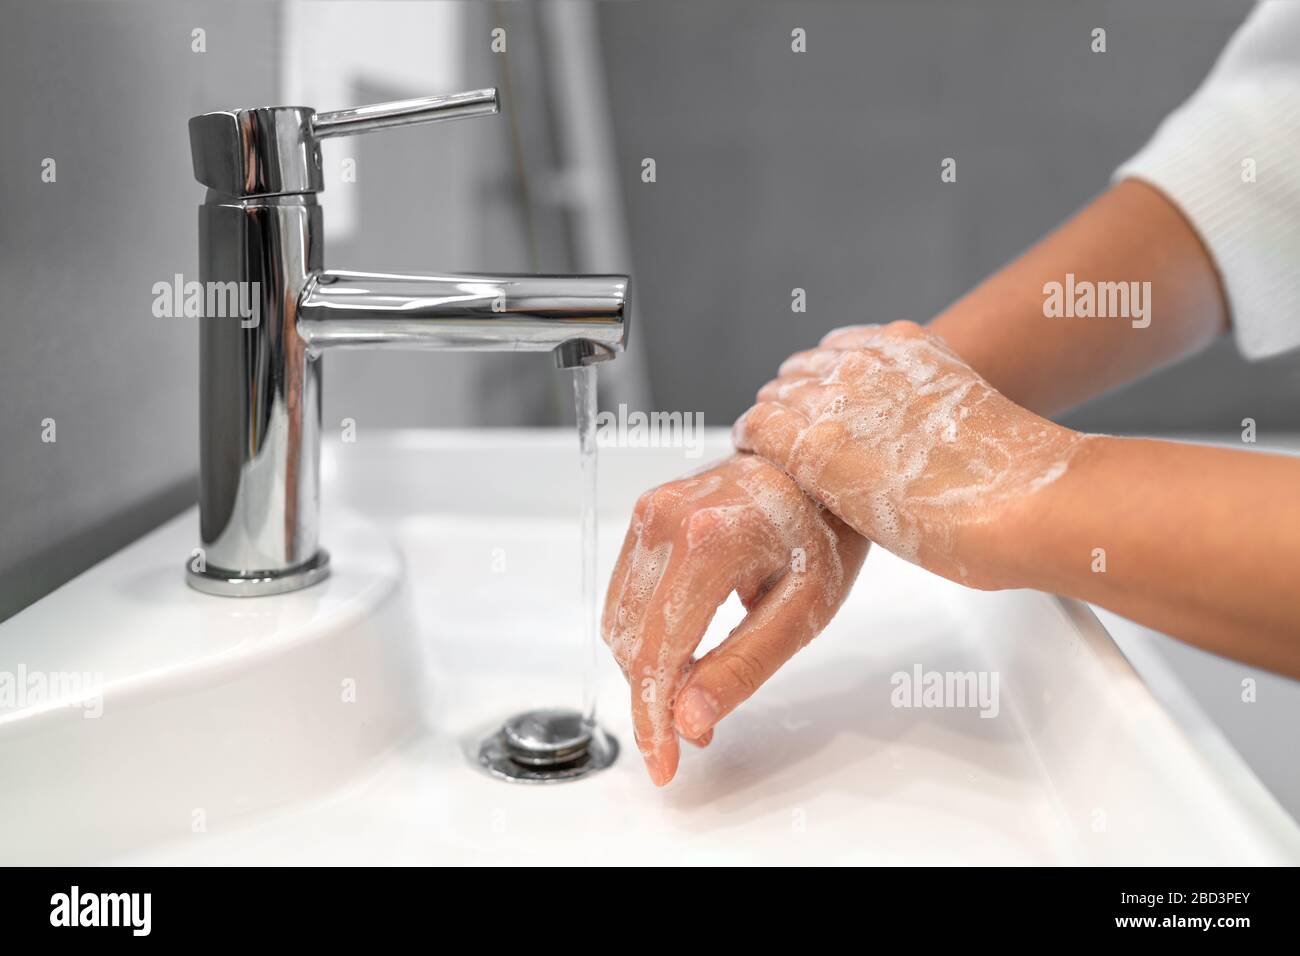 Hand washing lather soap rubbing wrists handwash step woman rinsing in water at bathroom faucet sink. Wash hands for COVID-19 spreading prevention. Coronavirus pandemic outbreak. Stock Photo